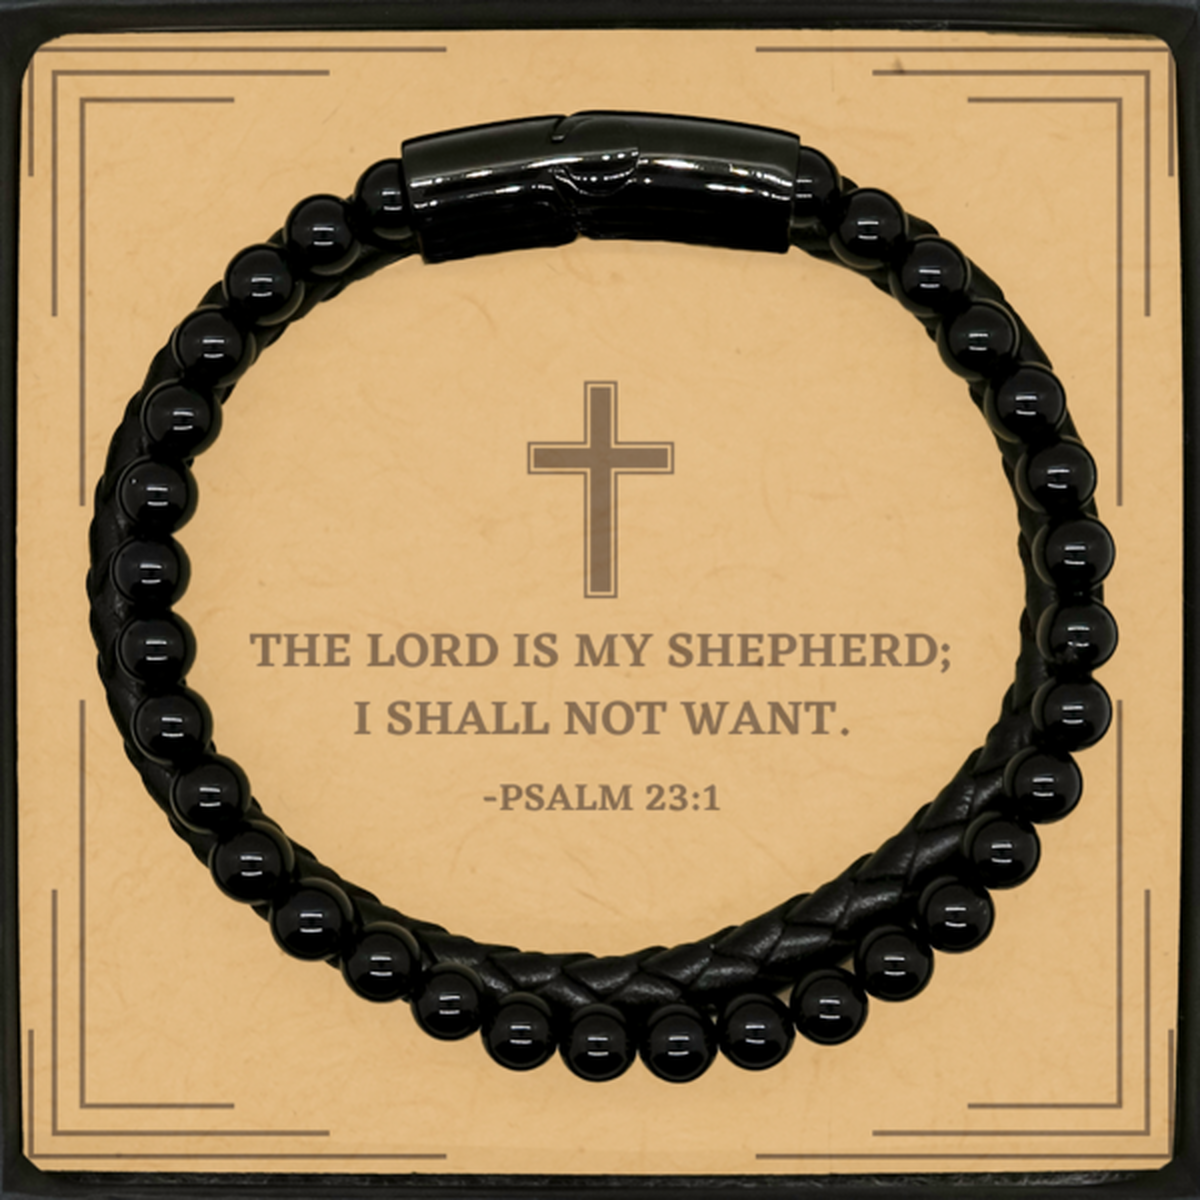 Baptism Gifts For Teenage Boys Girls, Christian Bible Verse Stone Leather Bracelet, The Lord is my shepherd, Confirmation Gifts, Bible Verse Card for Son, Godson, Grandson